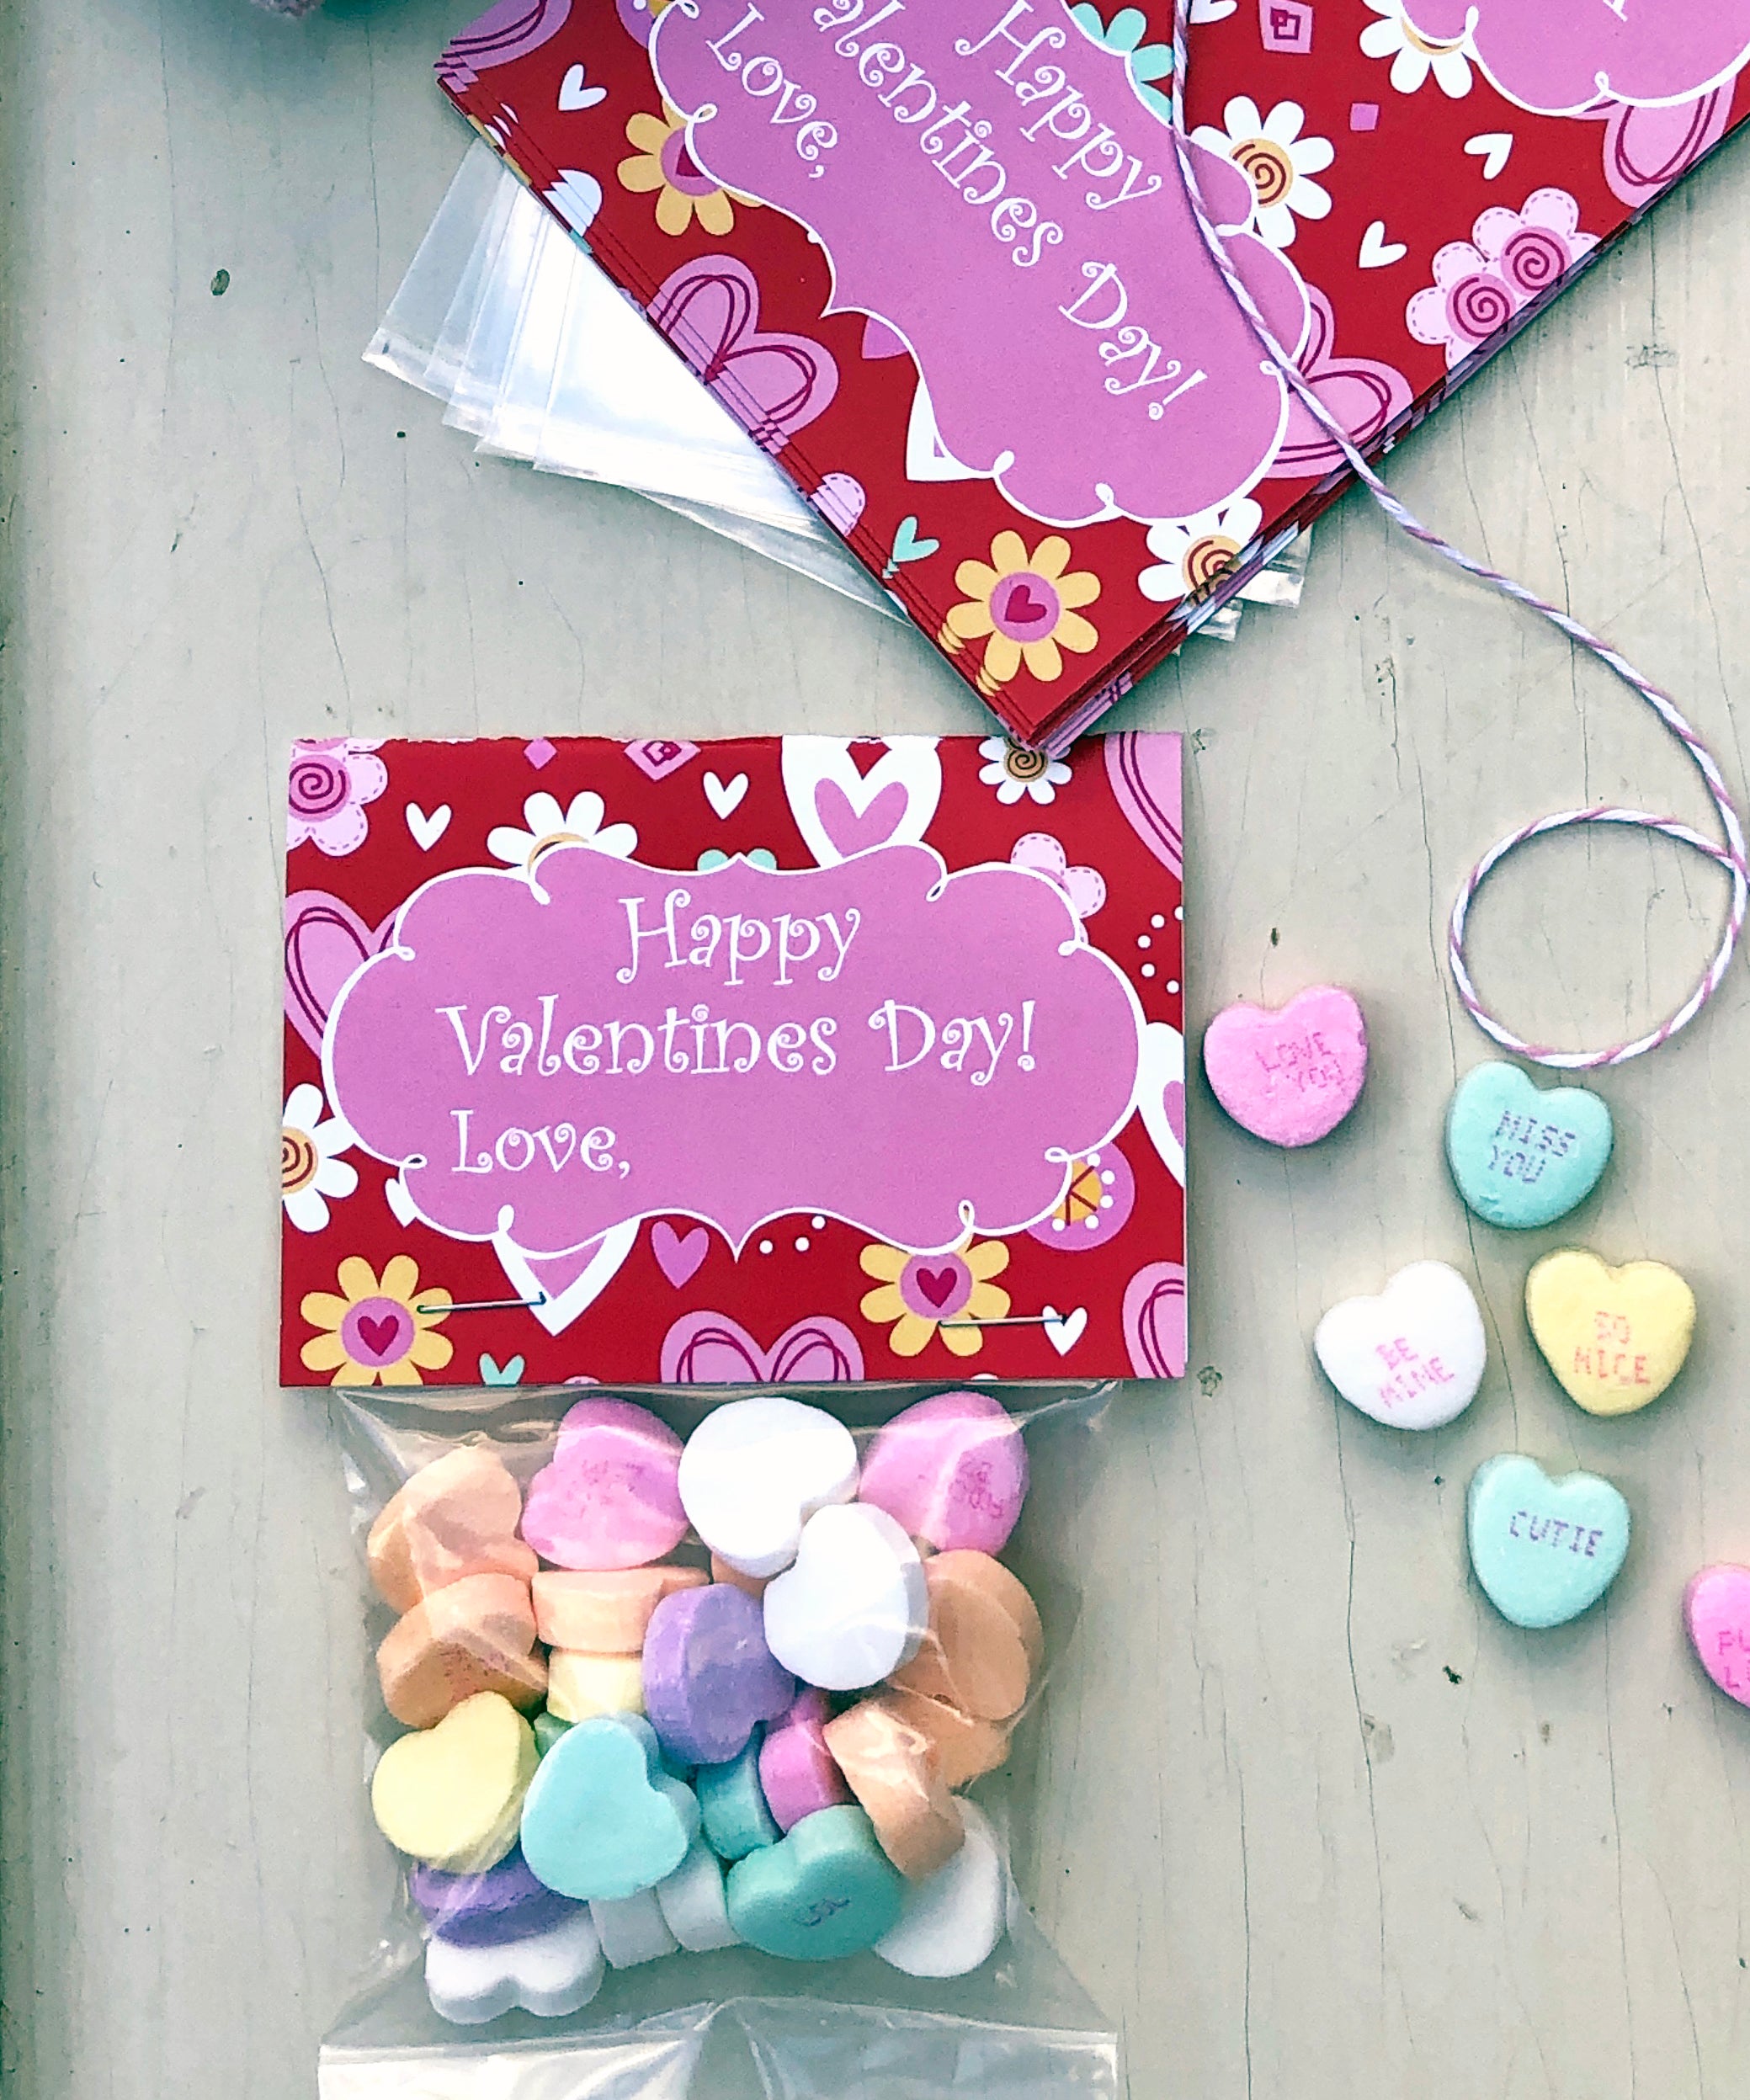 Valentine's Day Gifts under $20 for the Whole Class - Mom Junky